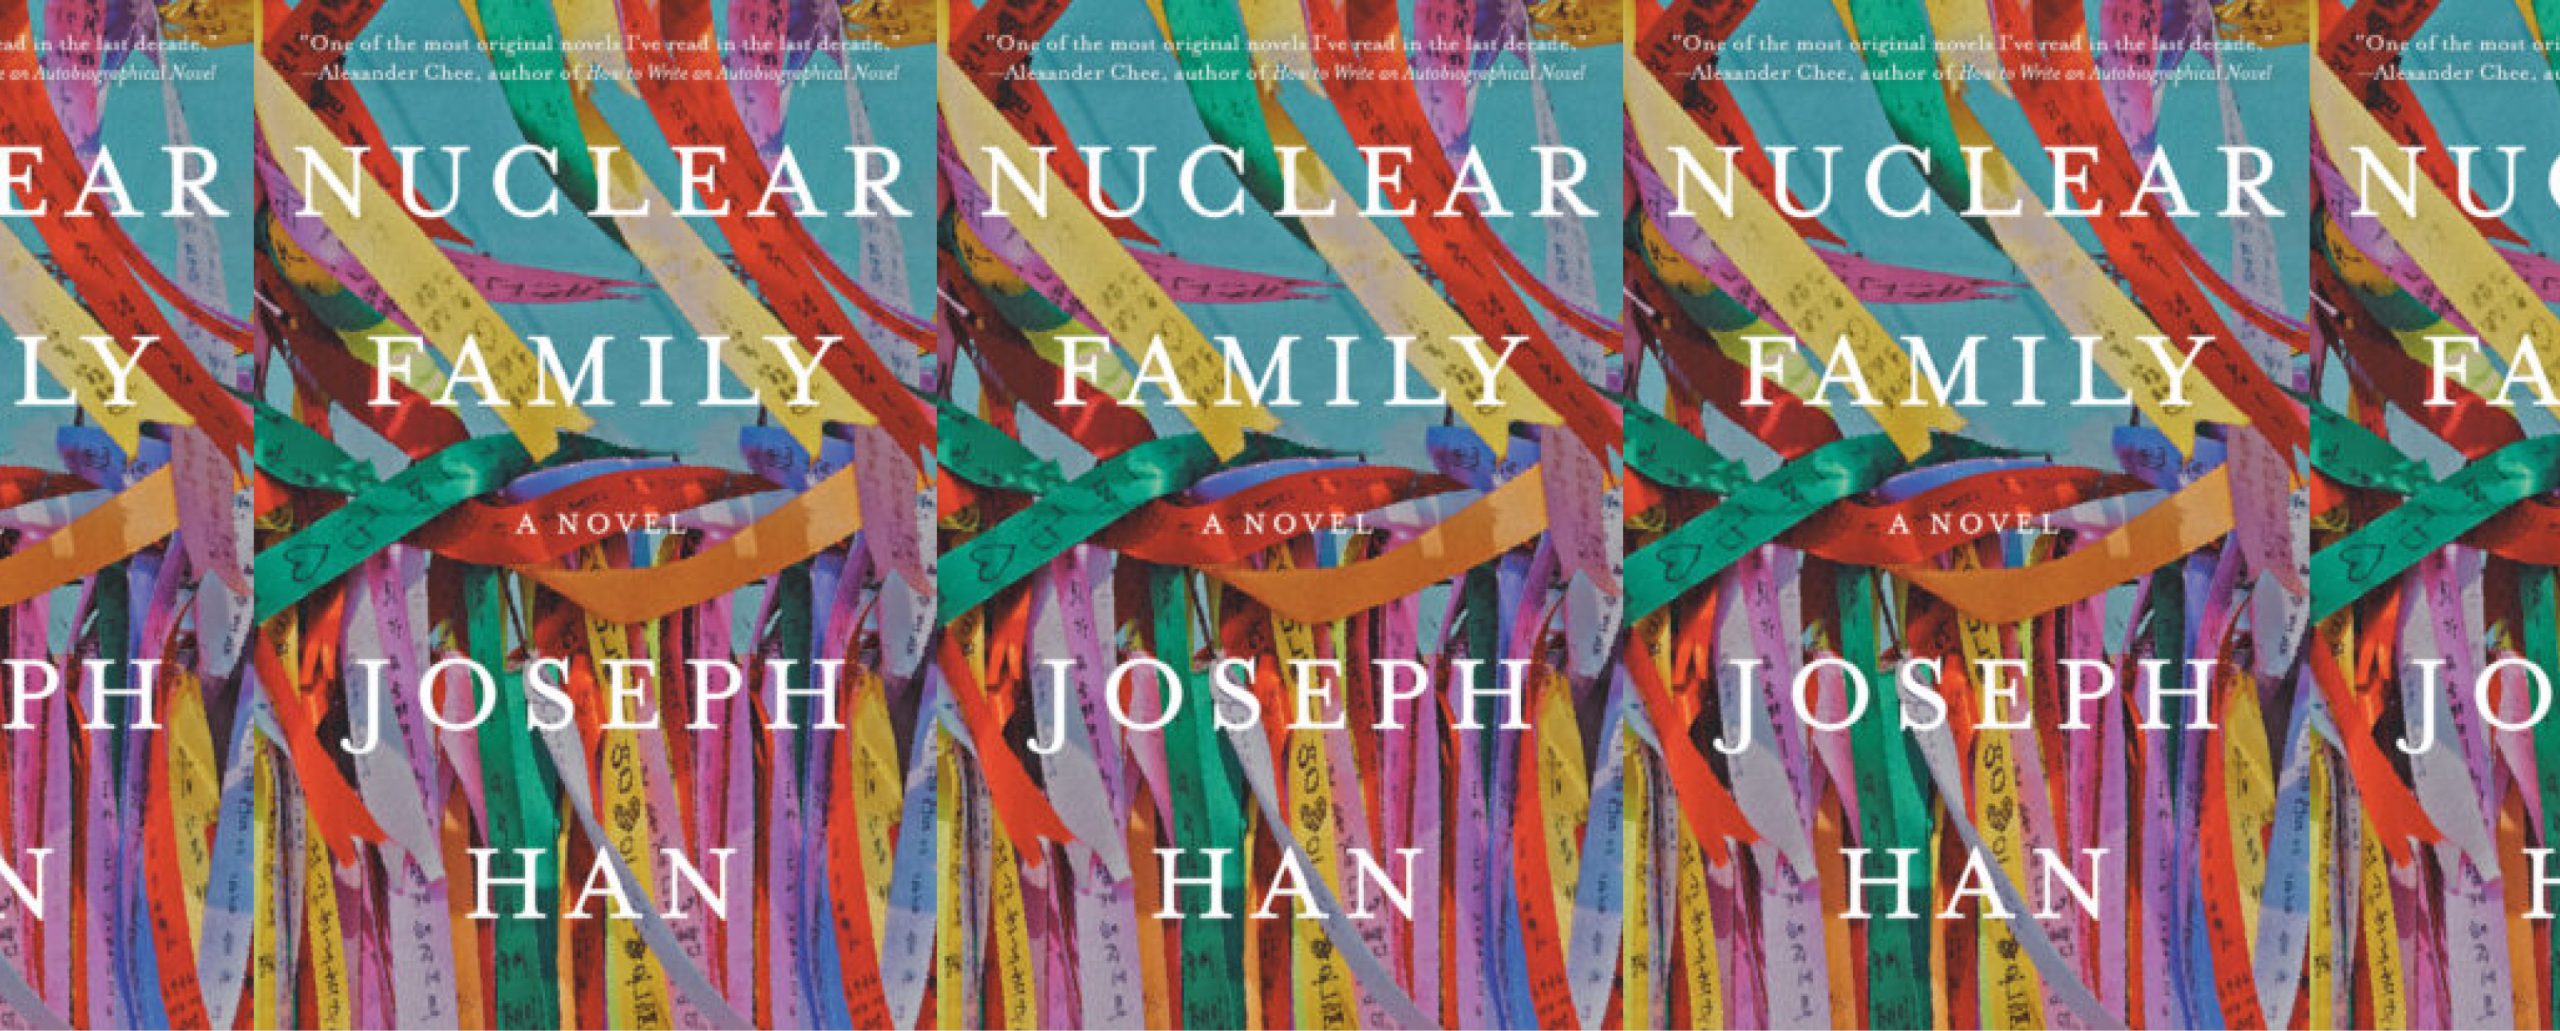 the book cover for Nuclear Family featuring a photograph of colorful ribbons from close up